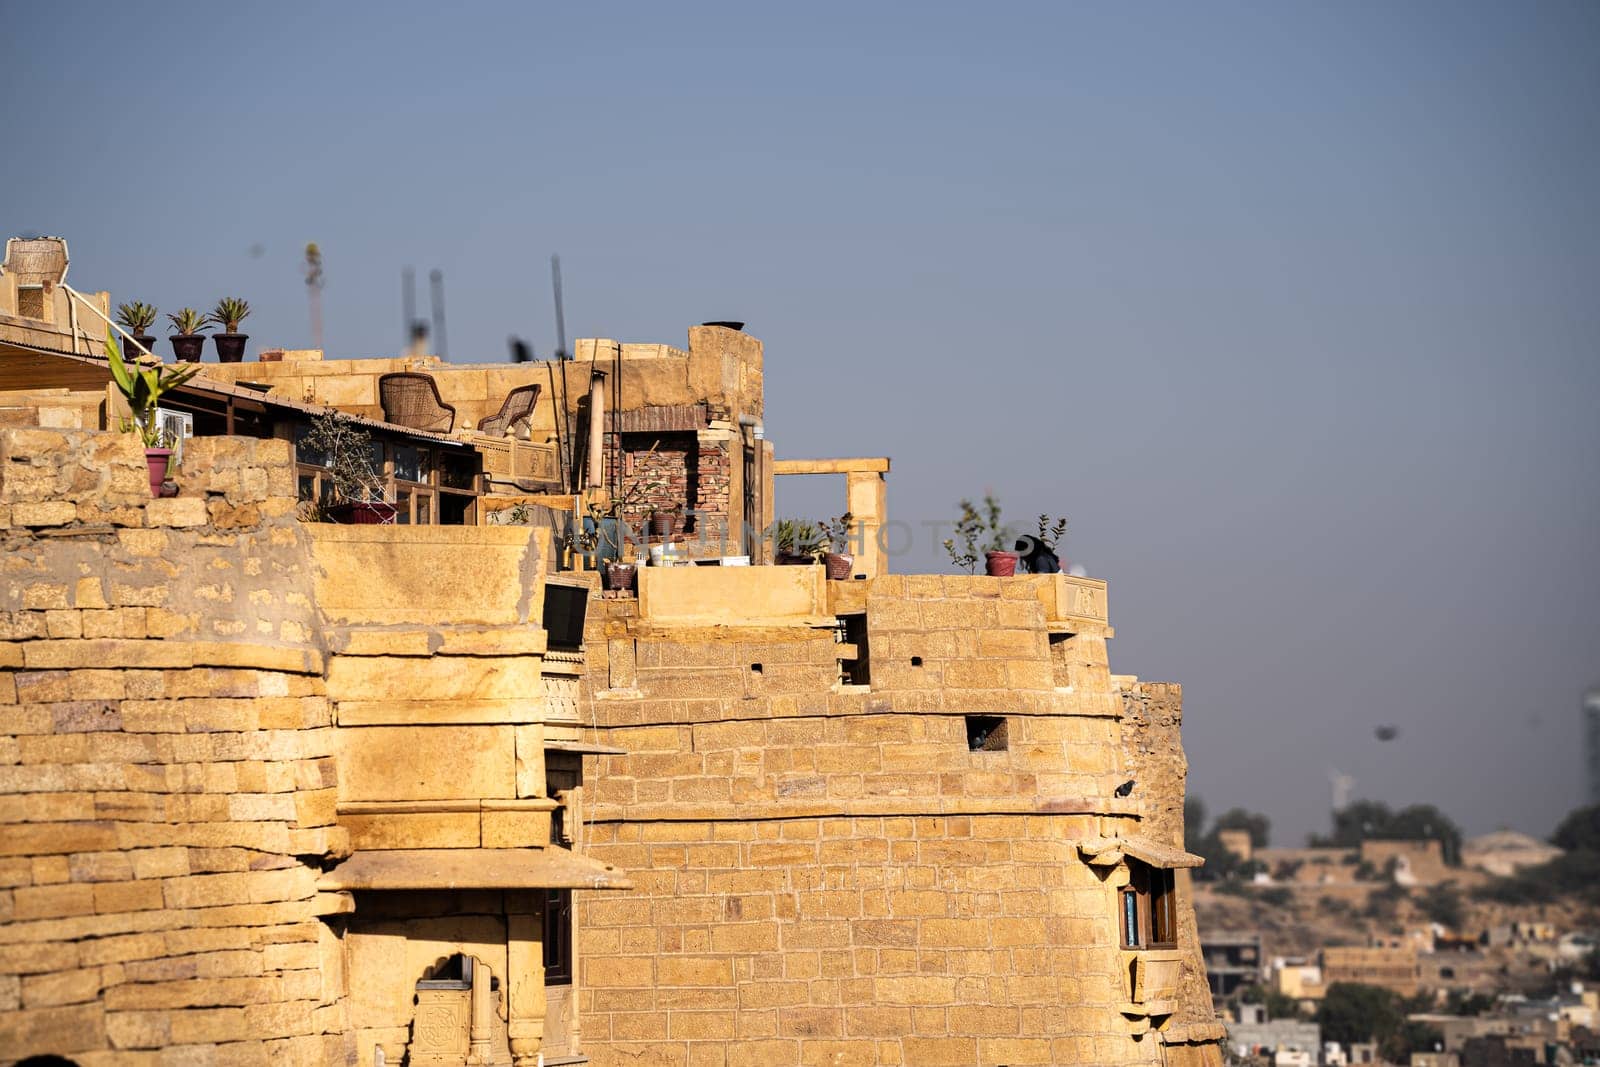 brown sandstone walls of the Jaisalmer Golden fort a popular tourist destination settled by rajput families in the state of Rajastha by Shalinimathur